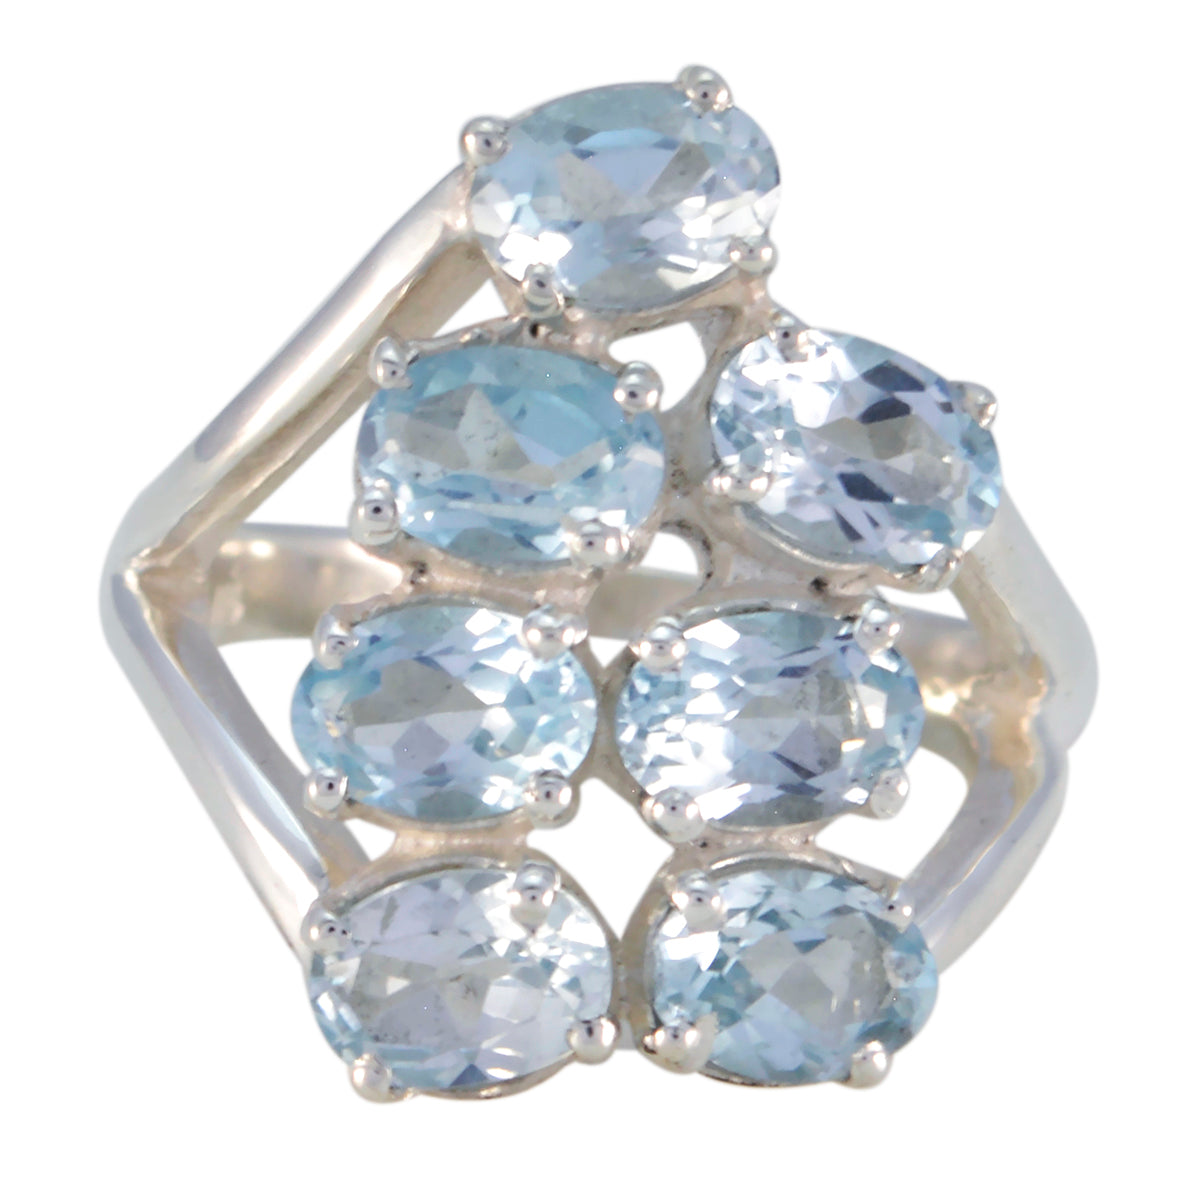 Well-Favoured Gem Blue Topaz 925 Silver Ring Kate Middleton Jewelry